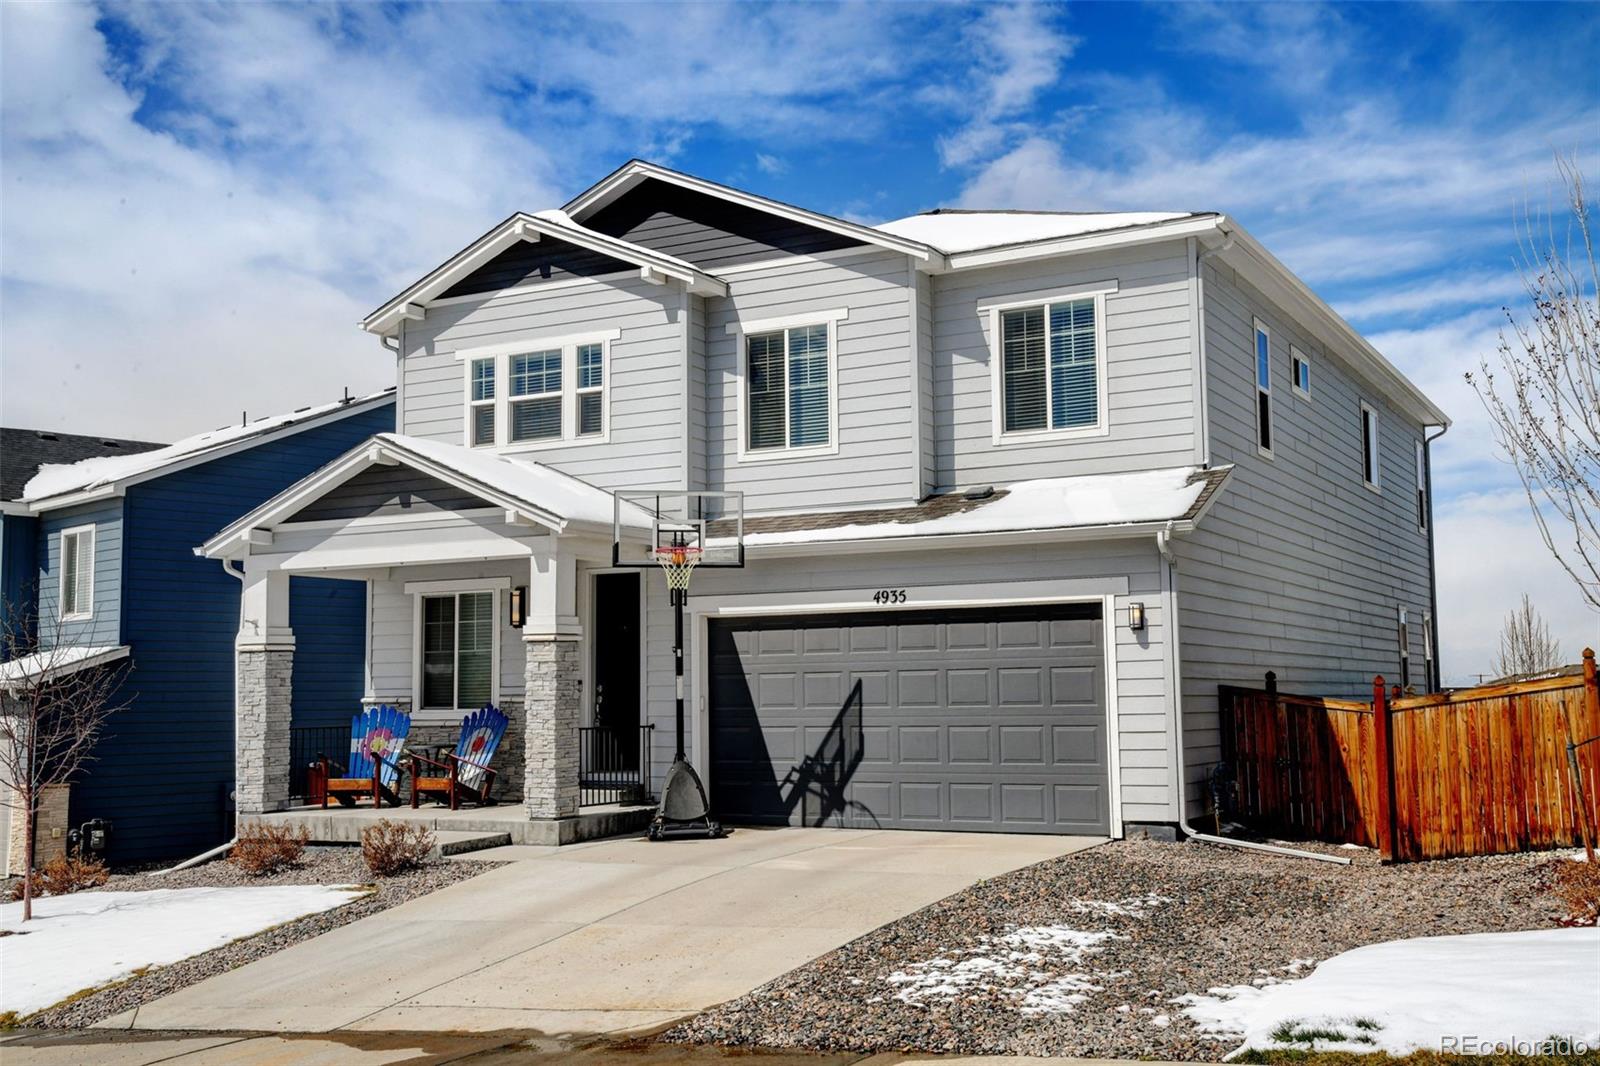 Report Image for 4935  Point Mesa Street,Castle Rock, Colorado